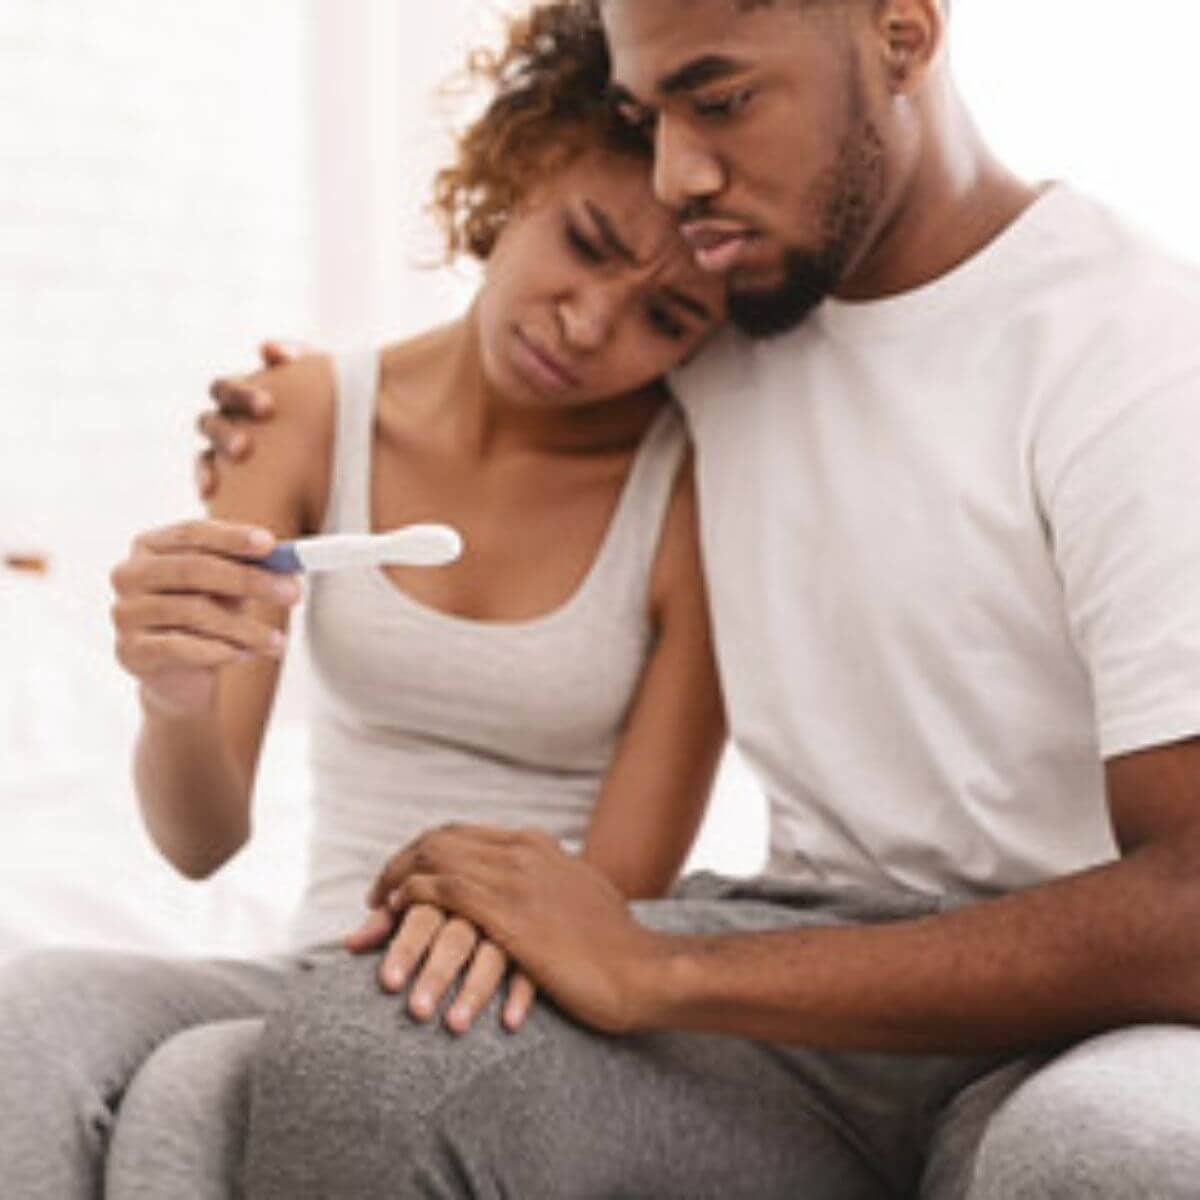 An African American man and woman are sitting on the edge of a bed. She is wearing a white tank top and grey pants and he is wearing a white teeshirt and dark grey sweats. They are looking down at a pregnancy test with confused looks on their faces.